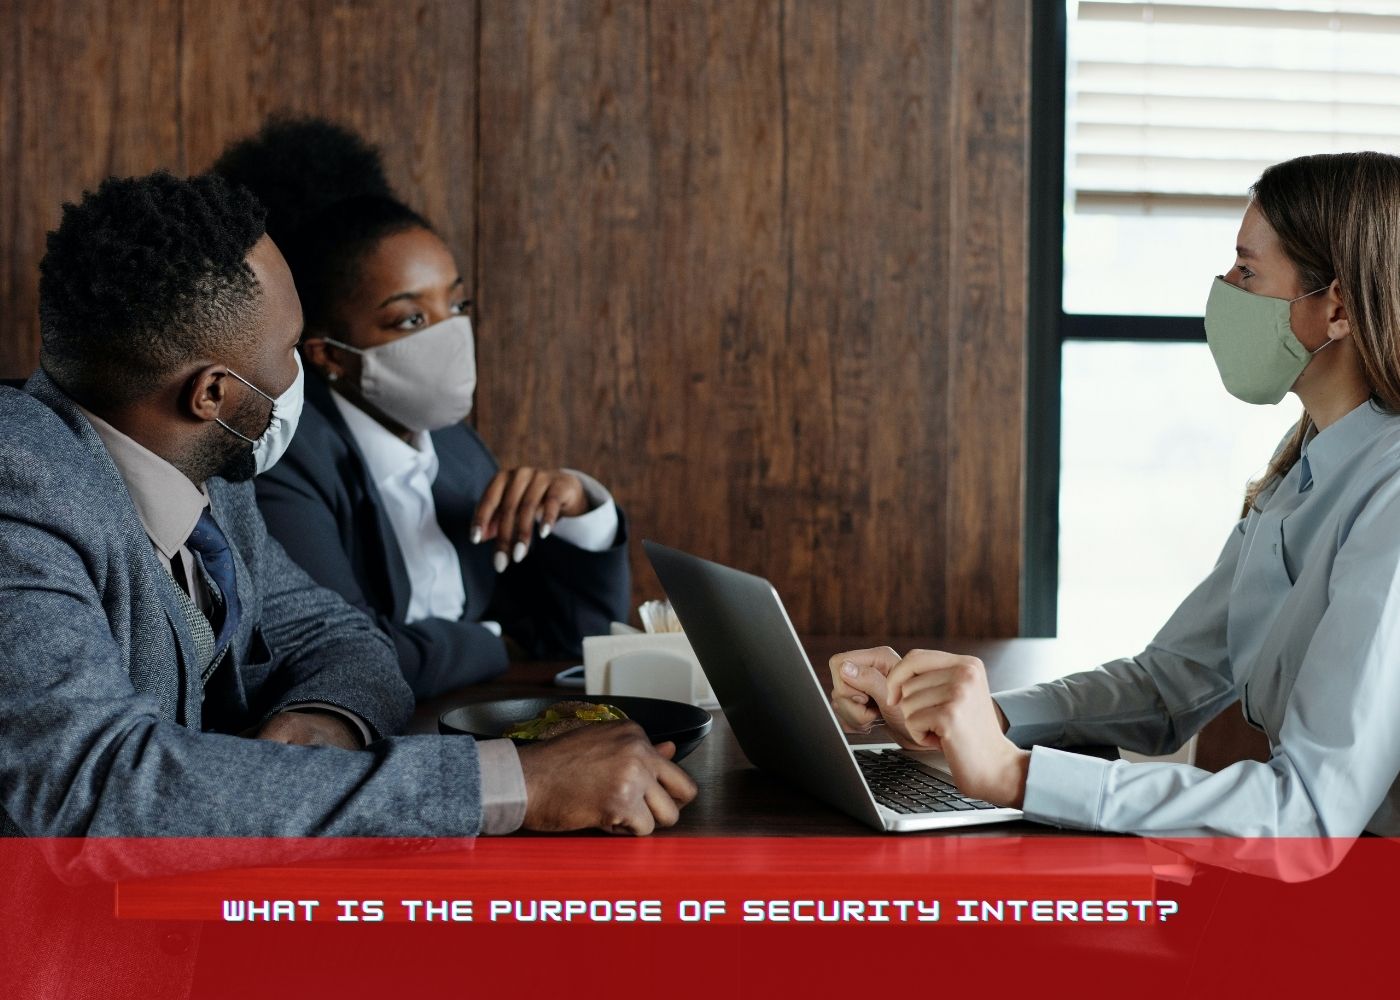 What is the purpose of Security Interest?